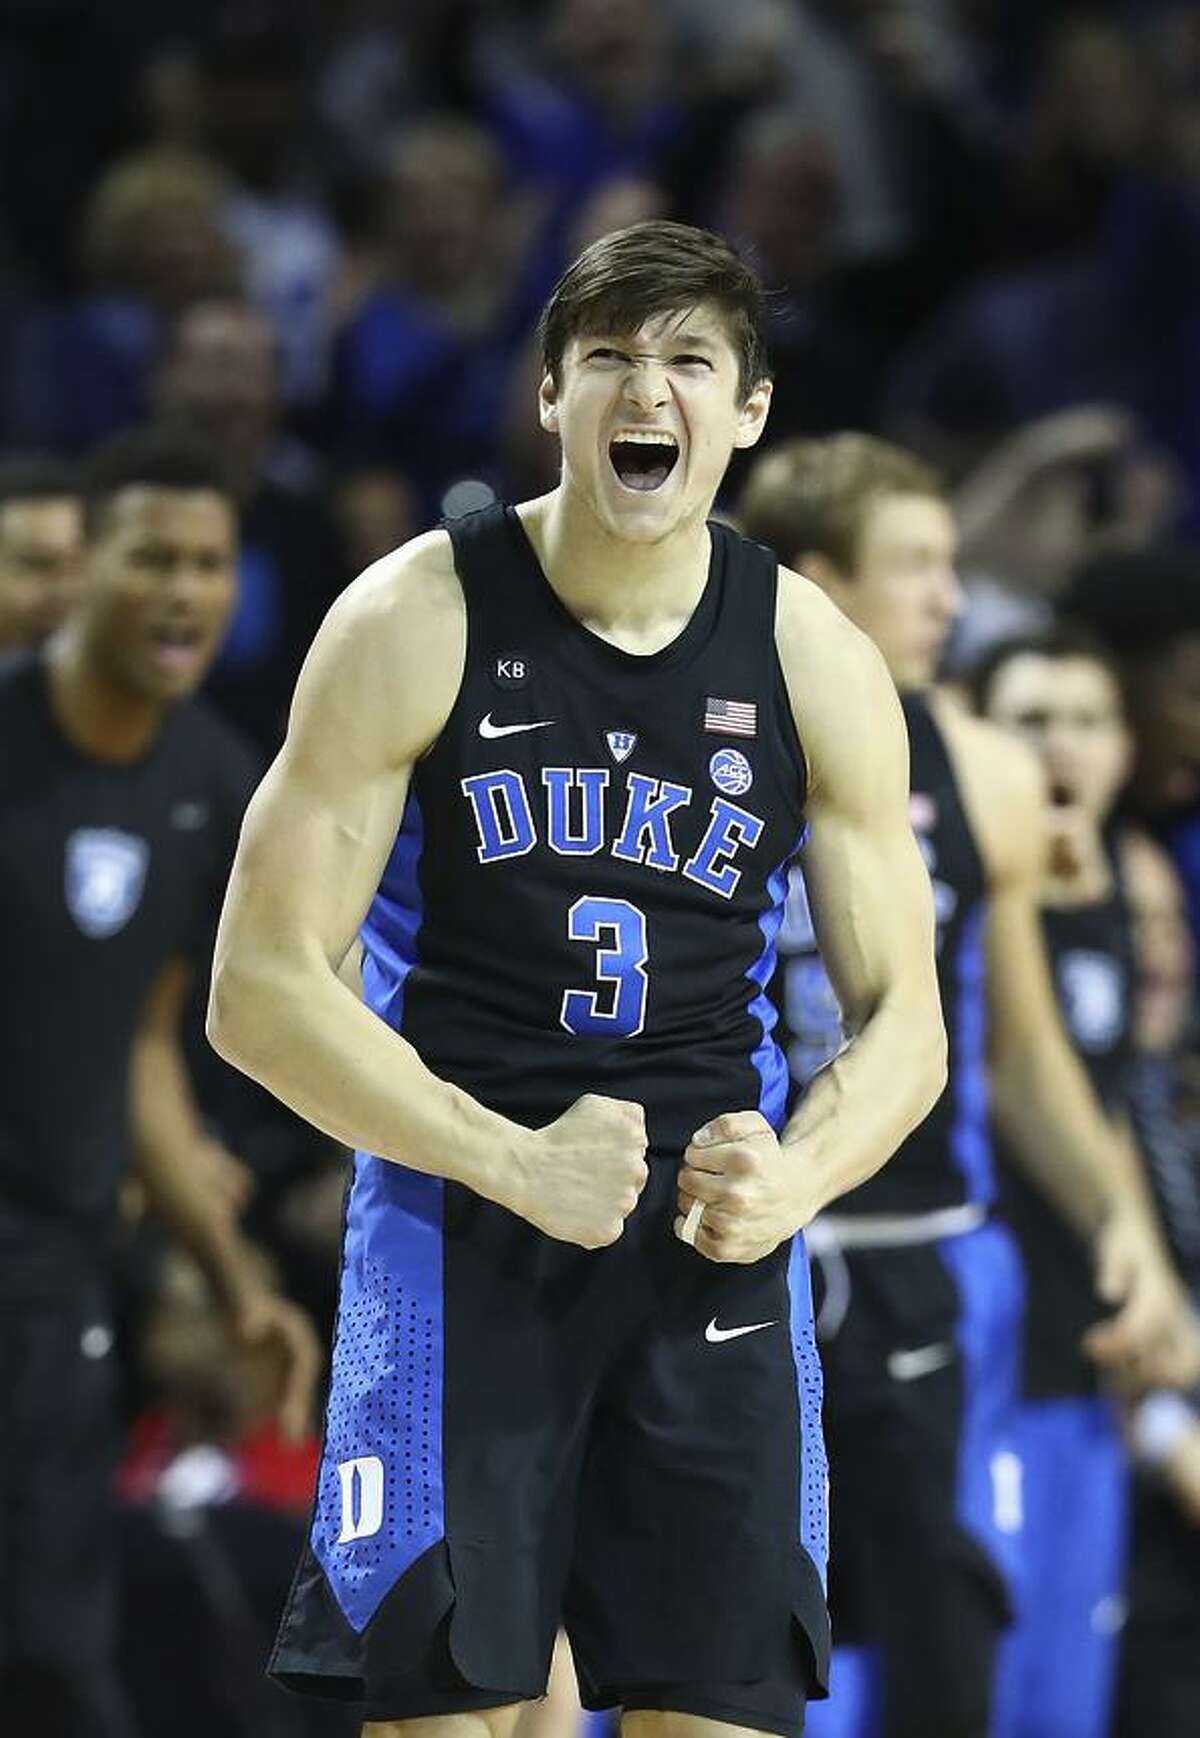 Duke: NEW YORK, NY - MARCH 10: Grayson Allen #3 of the Duke Blue Devils reacts after Luke Kennard #5 hit a three point shot against the North Carolina Tar Heels during the Semi Finals of the ACC Basketball Tournament at the Barclays Center on March 10, 2017 in New York City. (Photo by Al Bello/Getty Images)